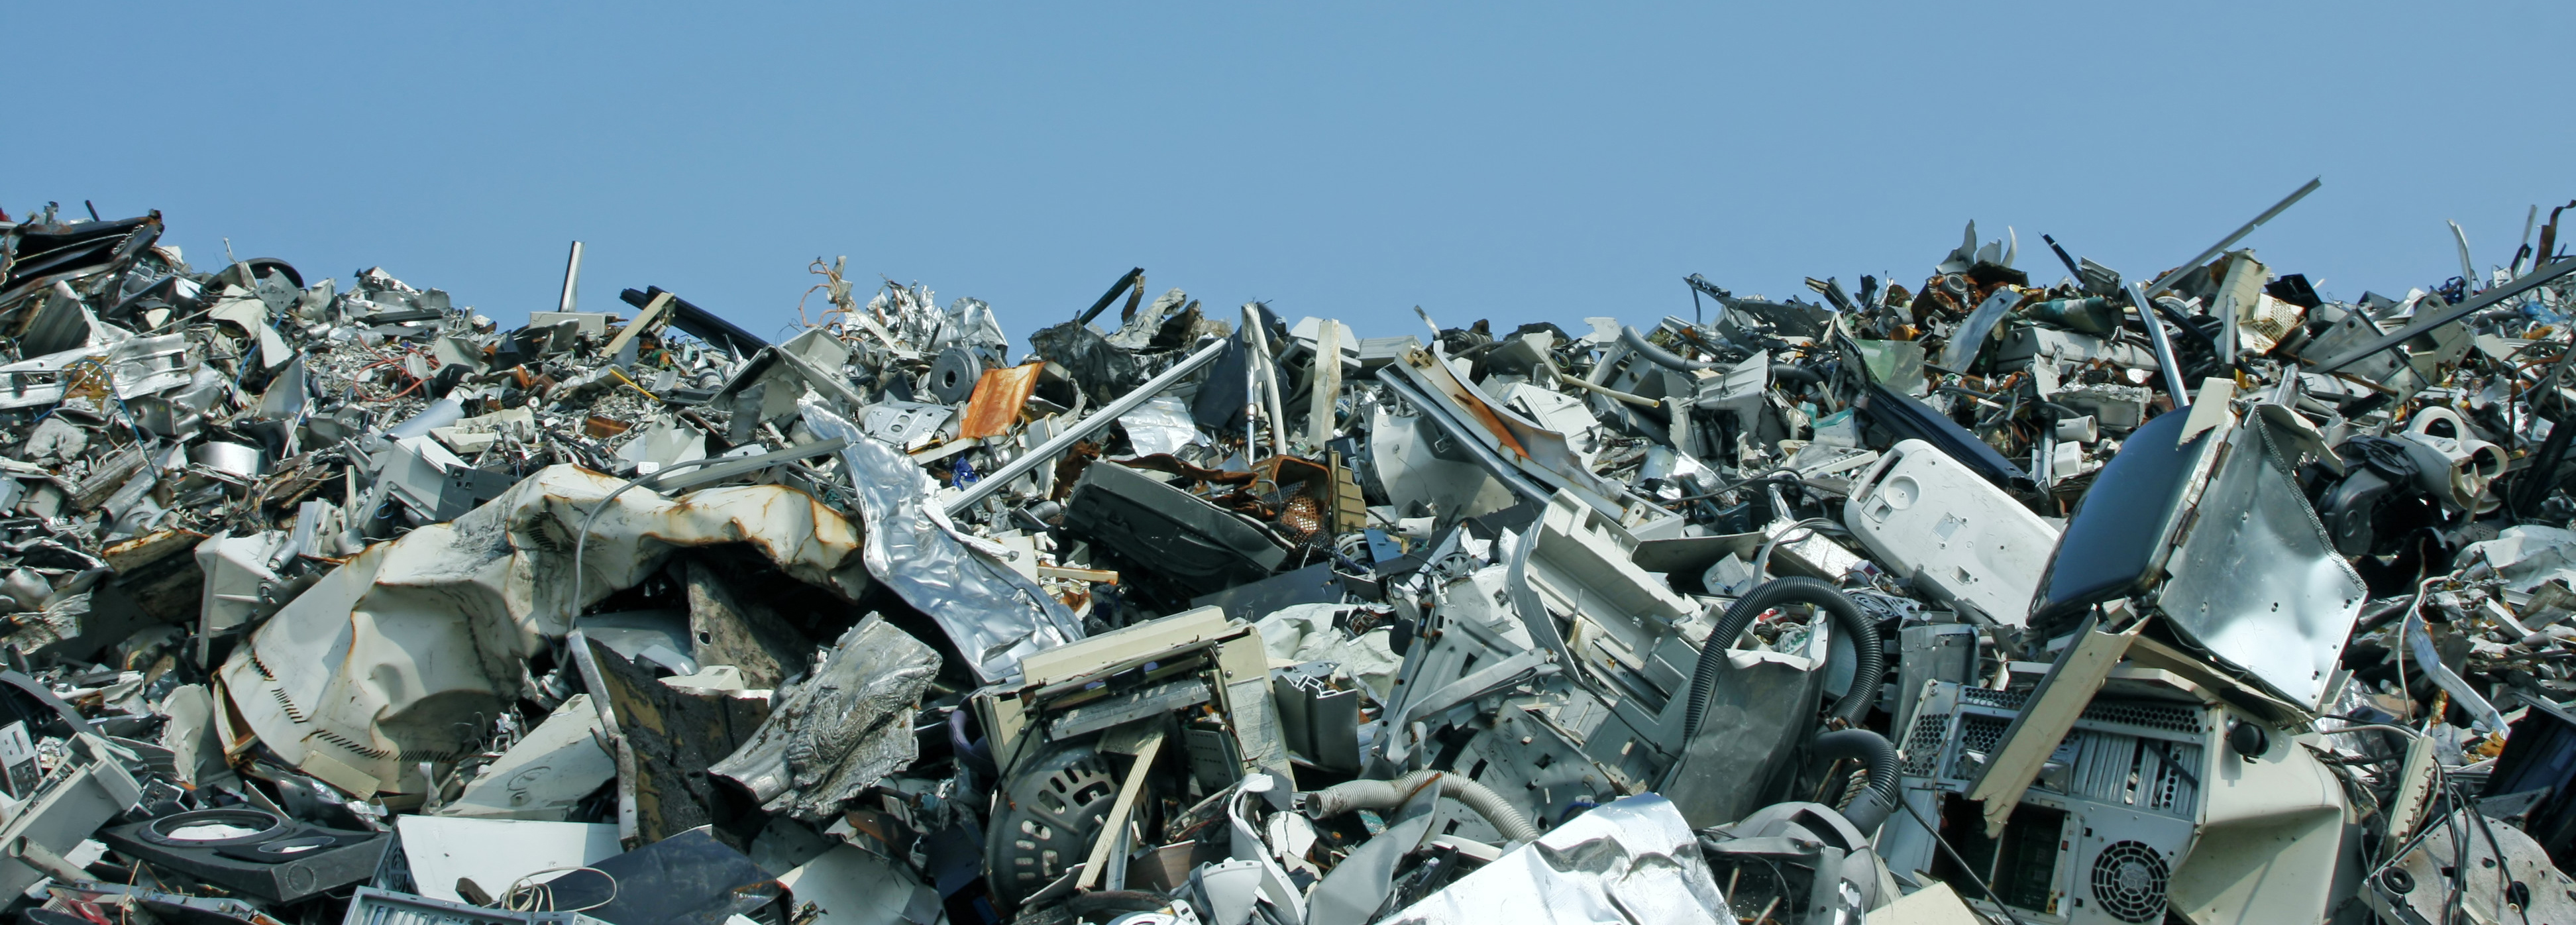 10 Businesses That Dominate The Landfill